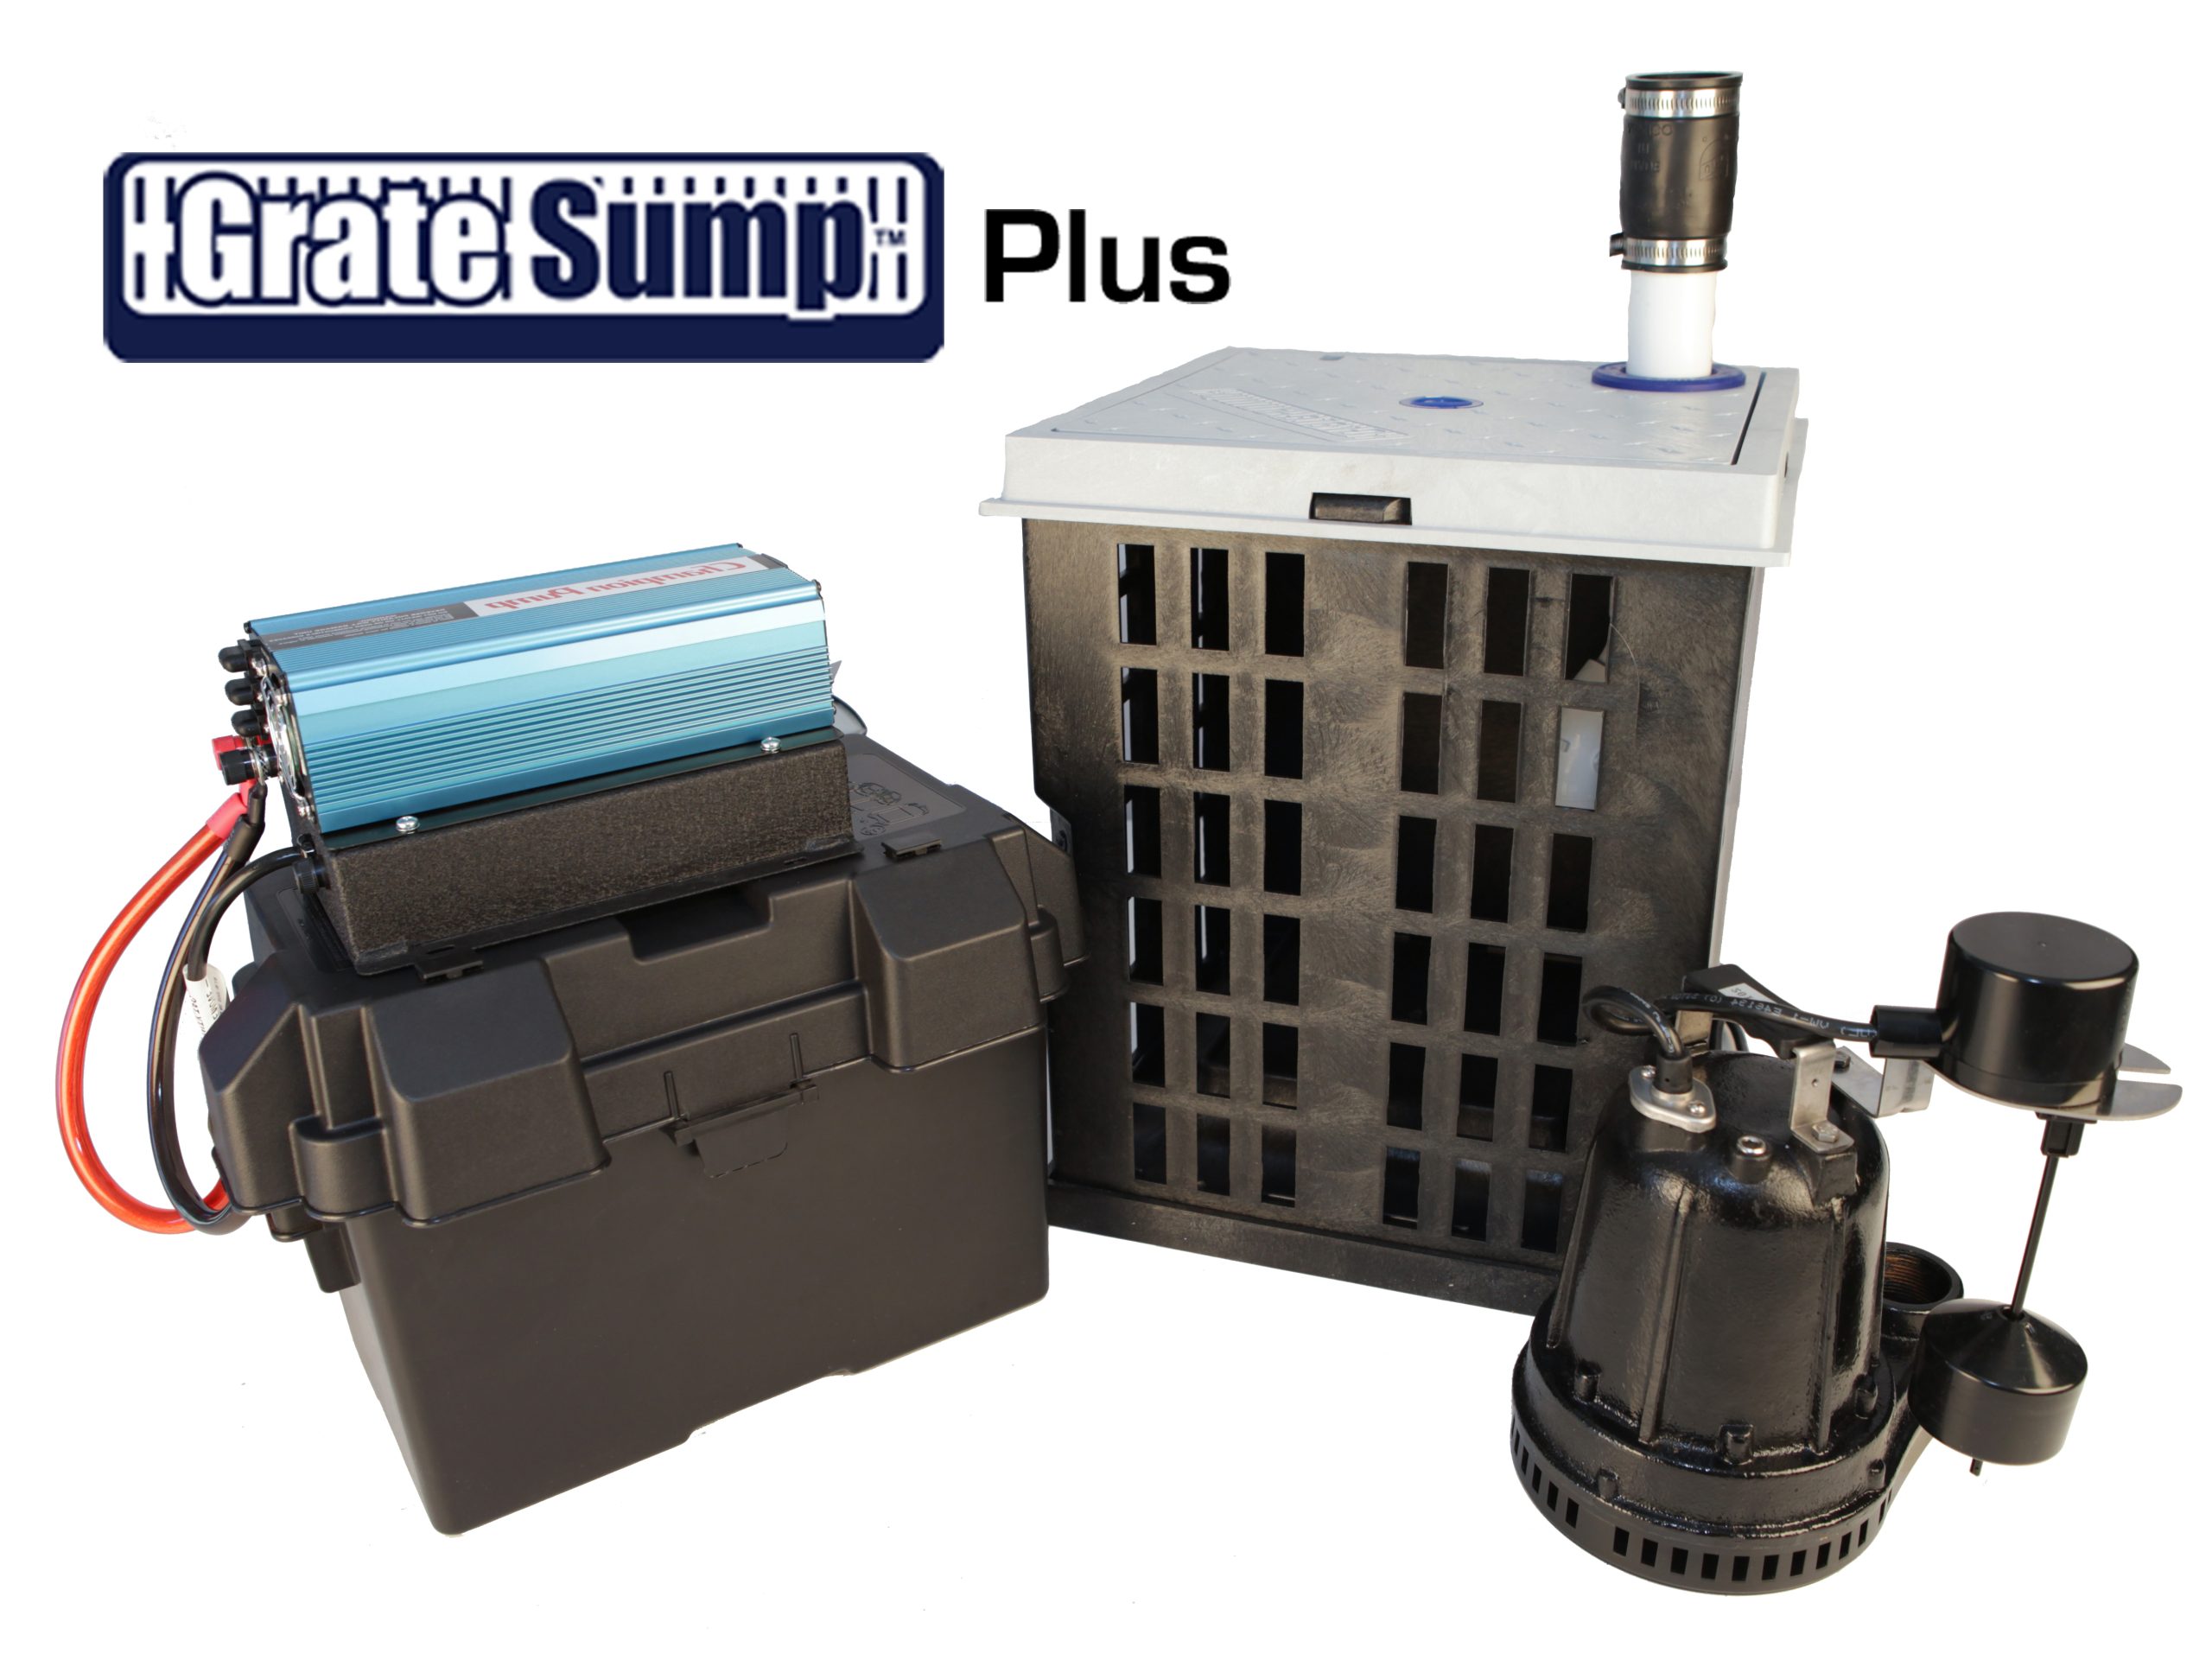 Grate Sump Plus with battery backup